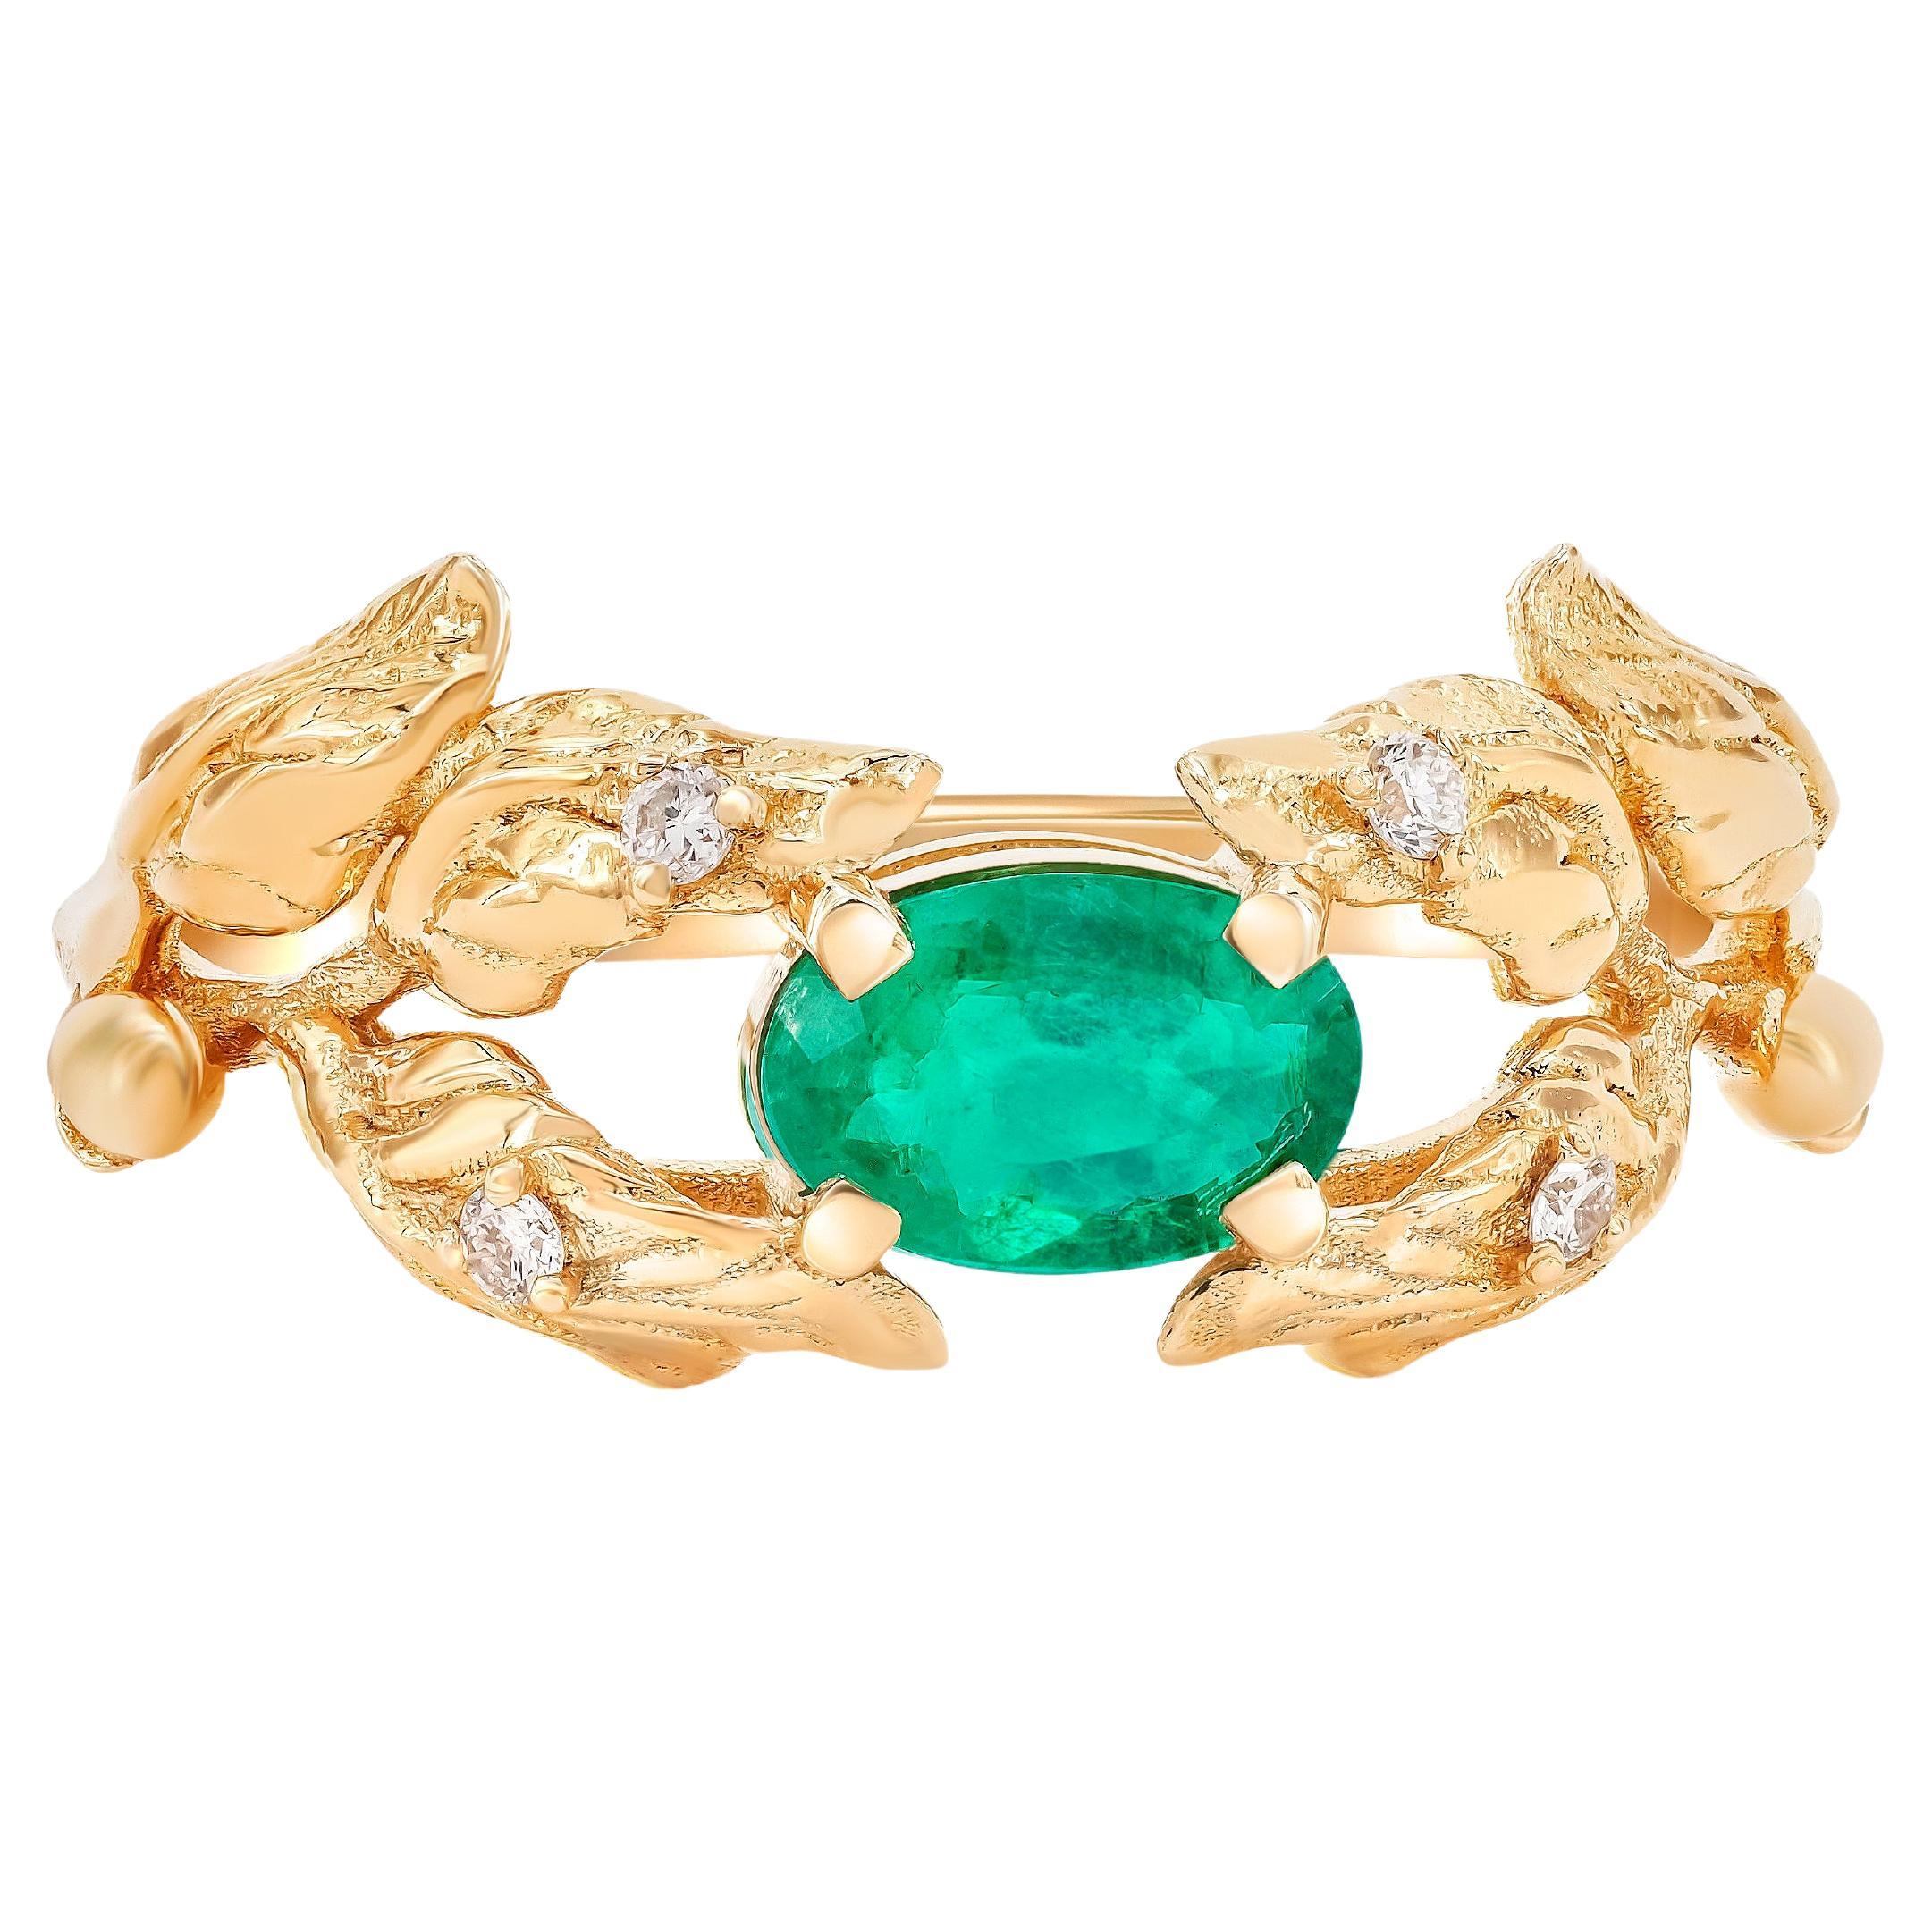 14 Karat Gold Olive Tree Ring with Emerald and Diamonds.